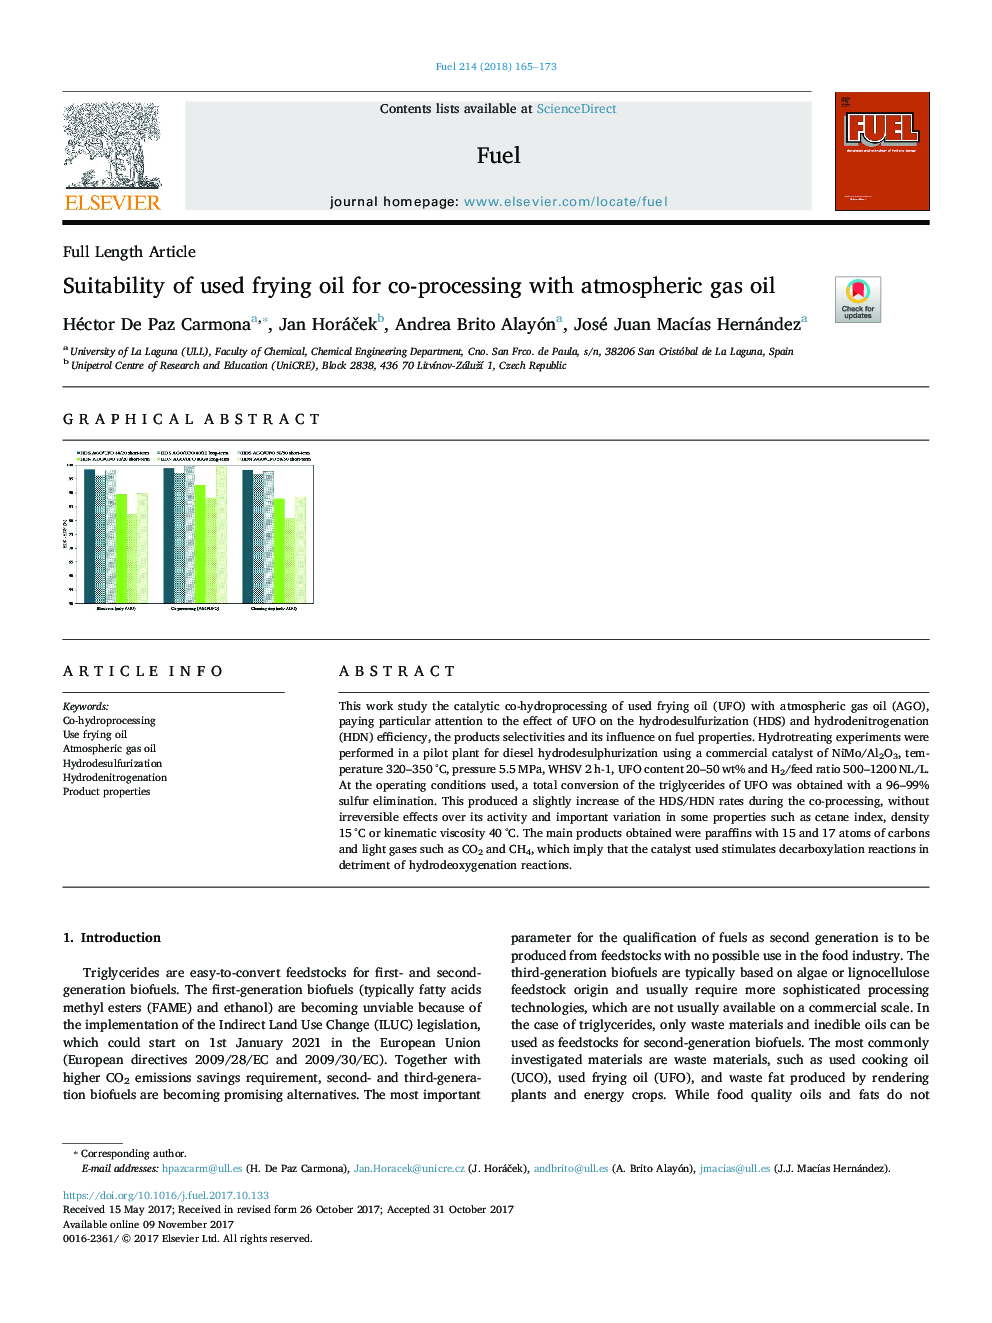 Suitability of used frying oil for co-processing with atmospheric gas oil